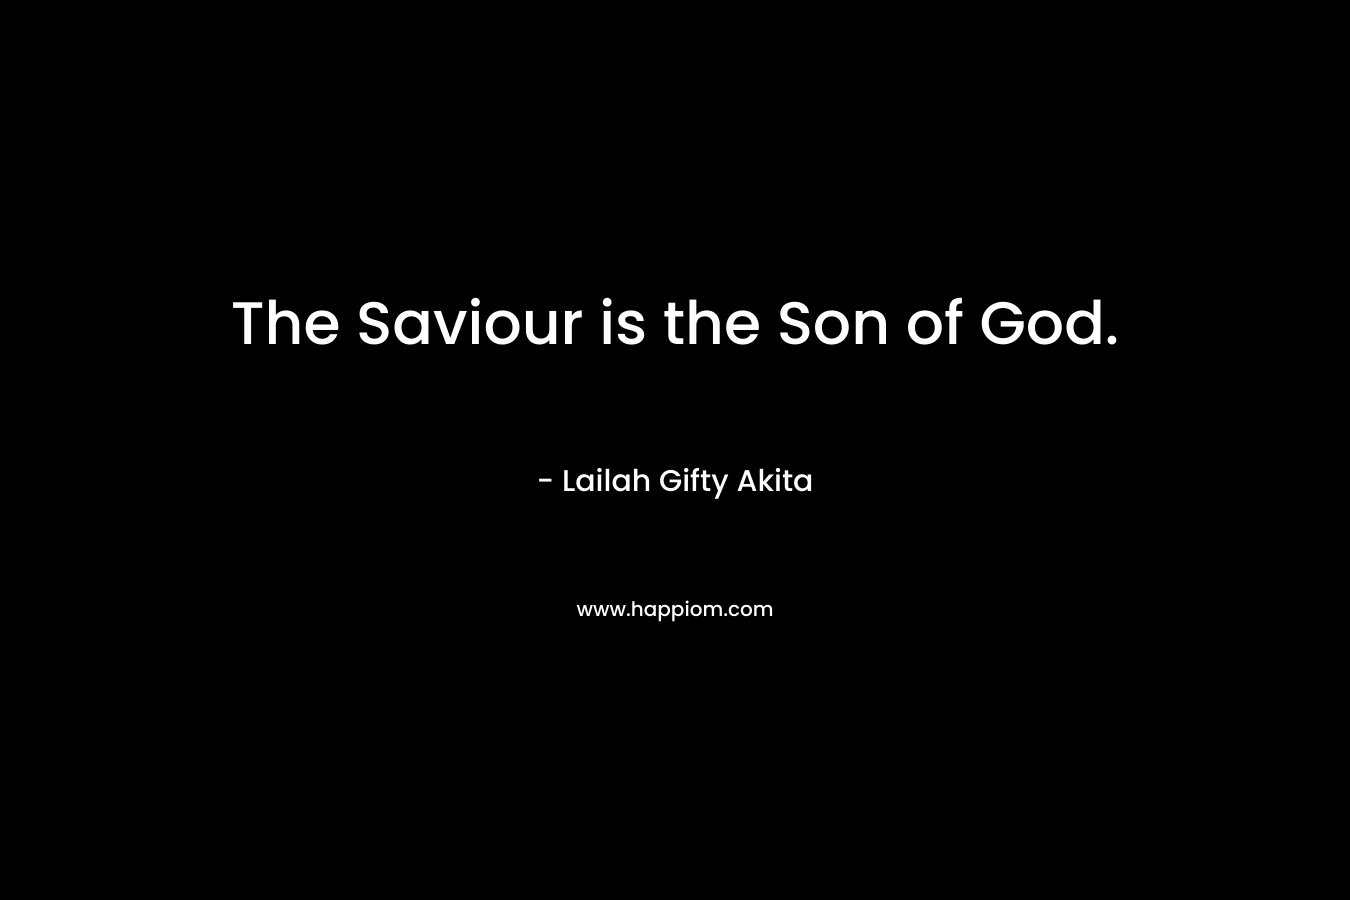 The Saviour is the Son of God.